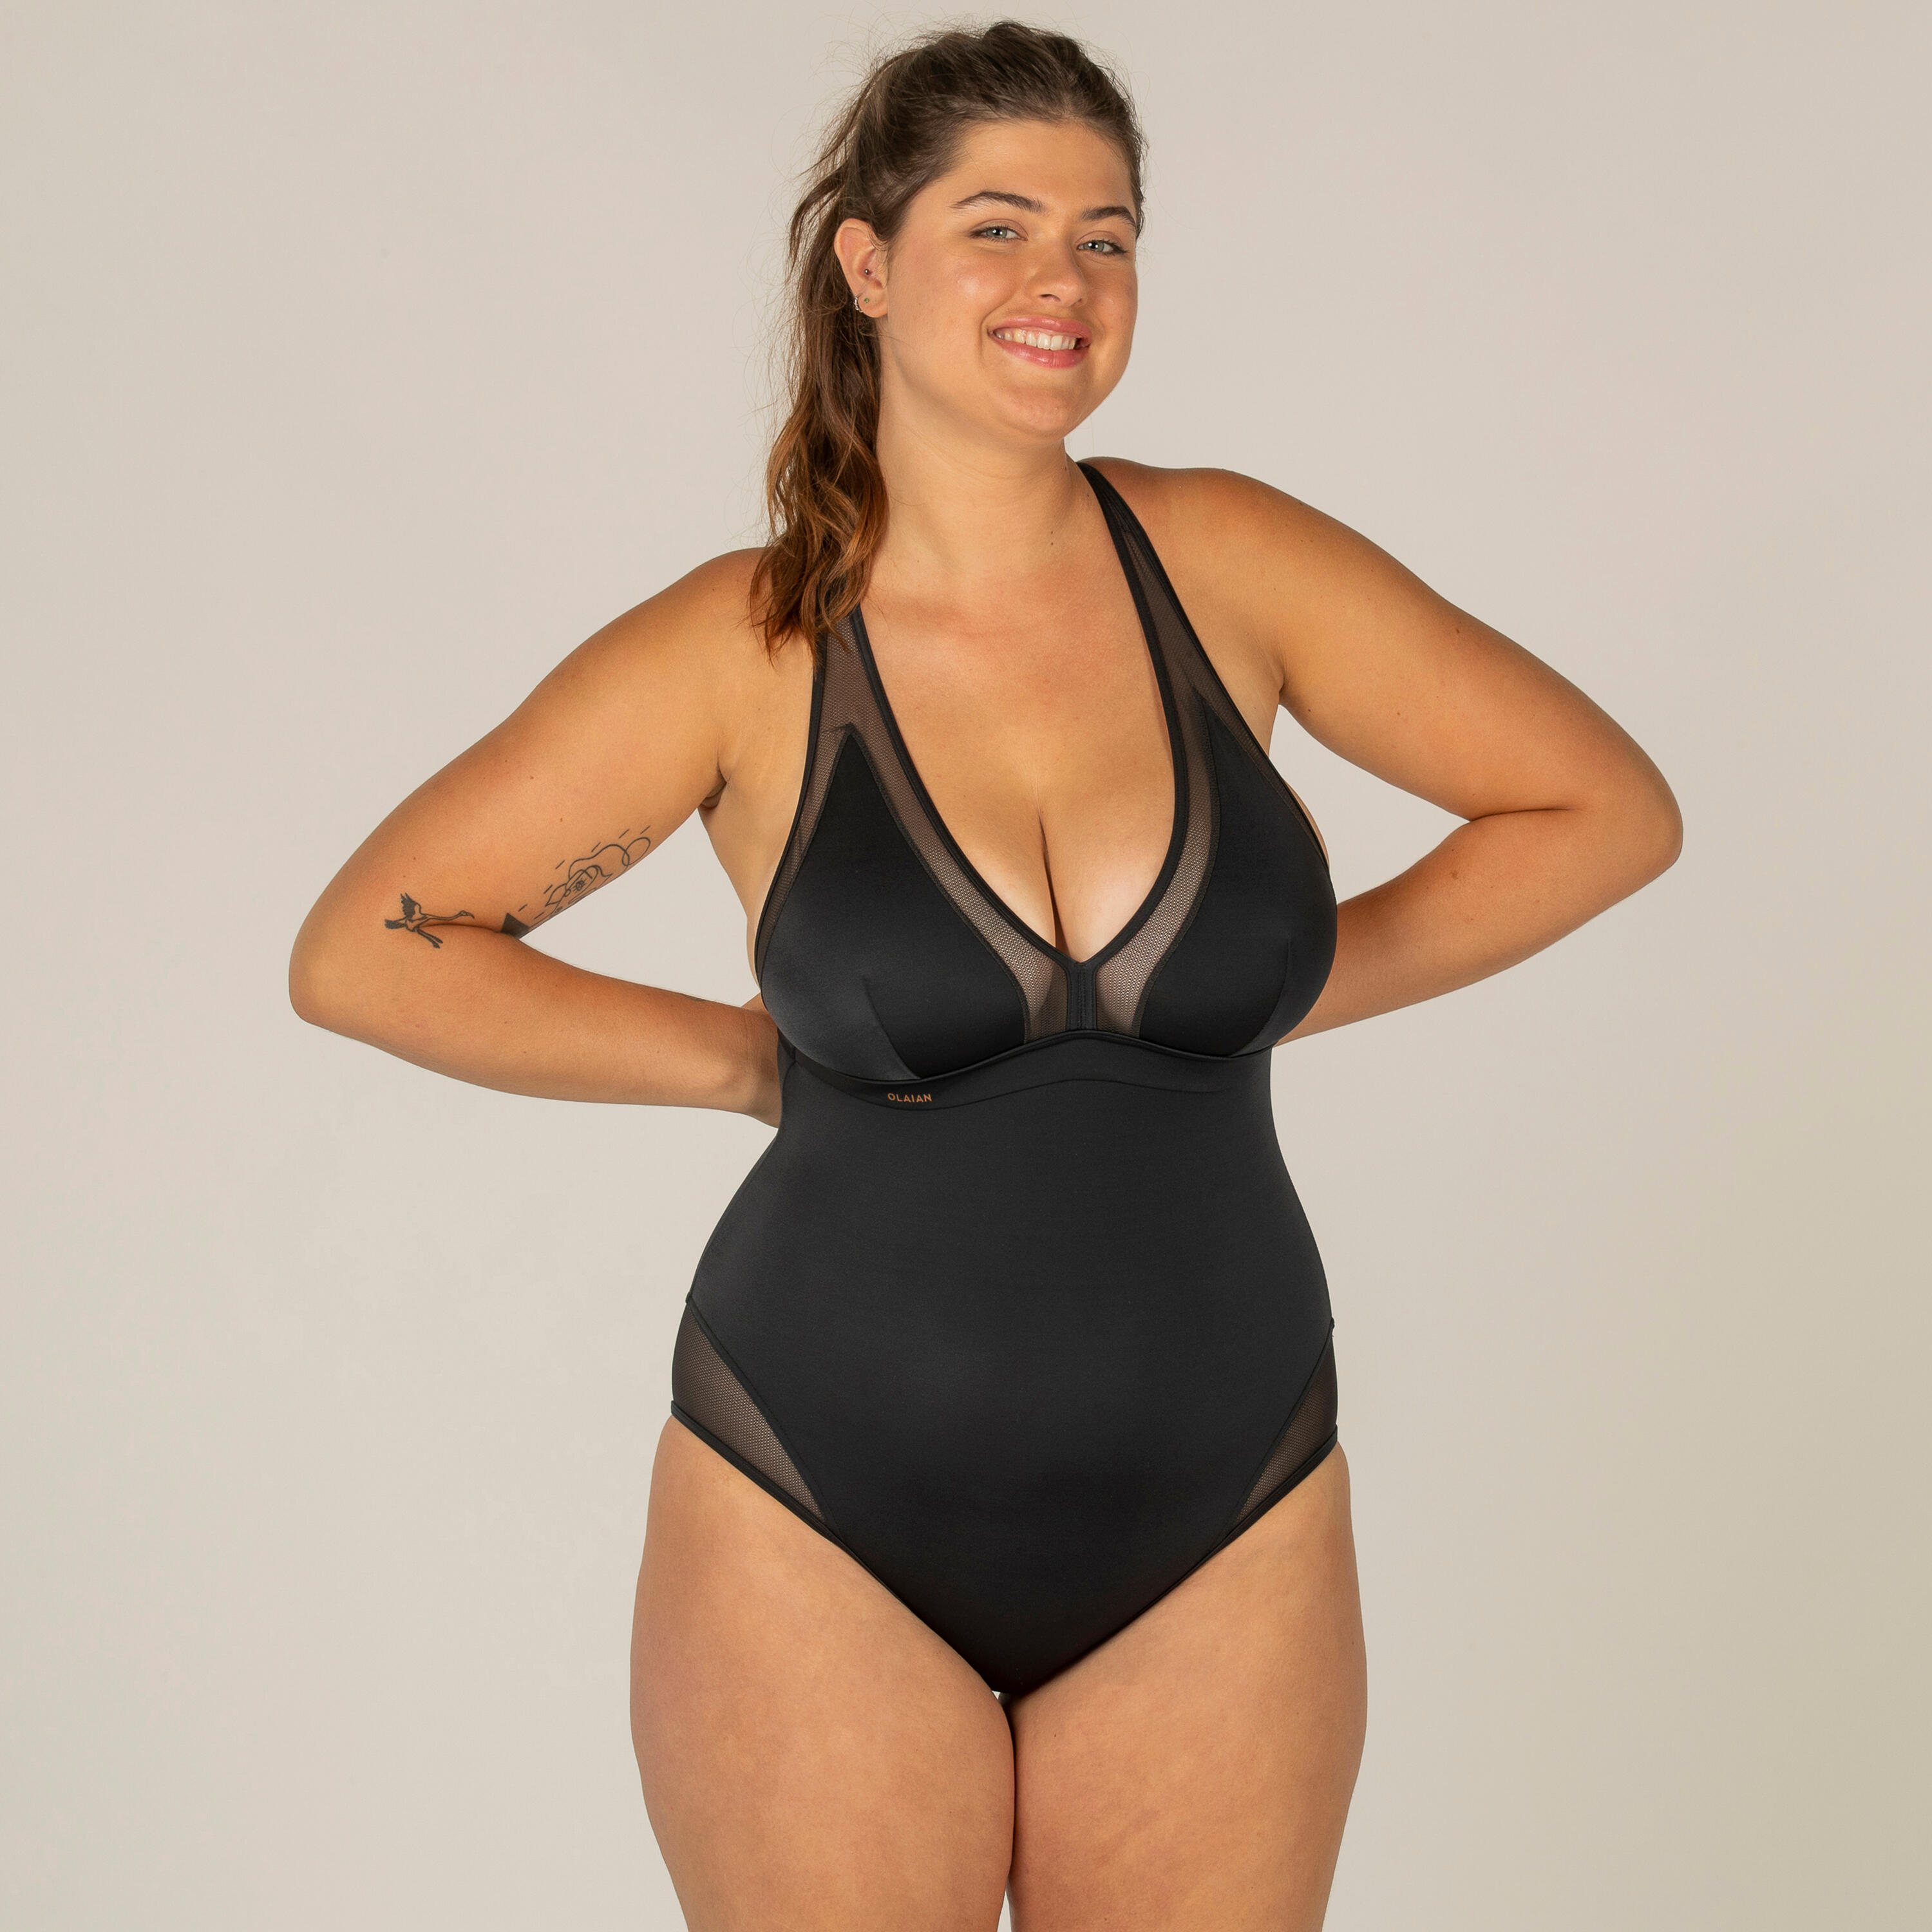 WOMEN'S SURFING SWIMSUIT WITH X BACK ISA 12/15